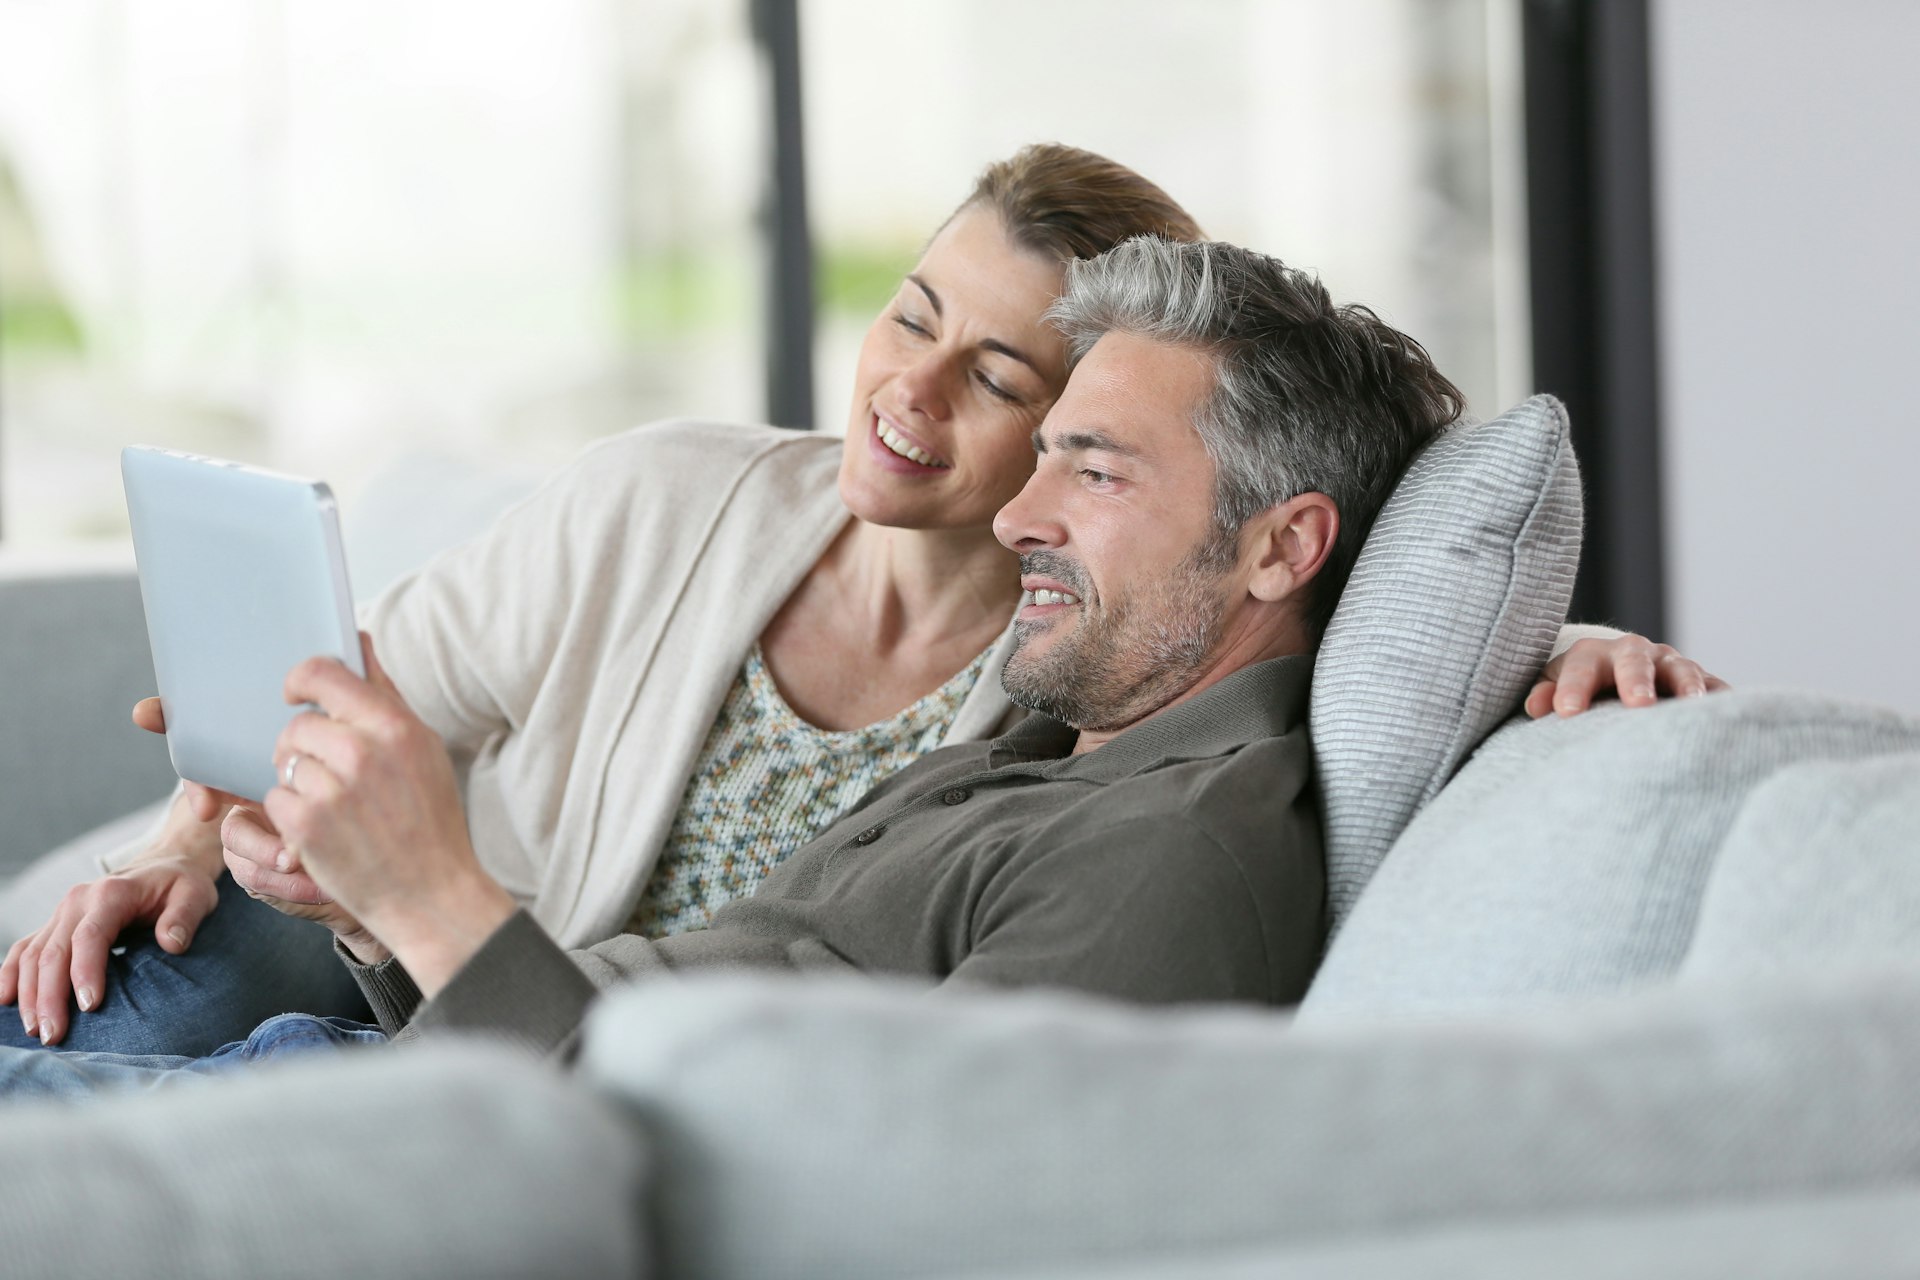 Landlords relaxing on the sofa smiling, while checking their property online